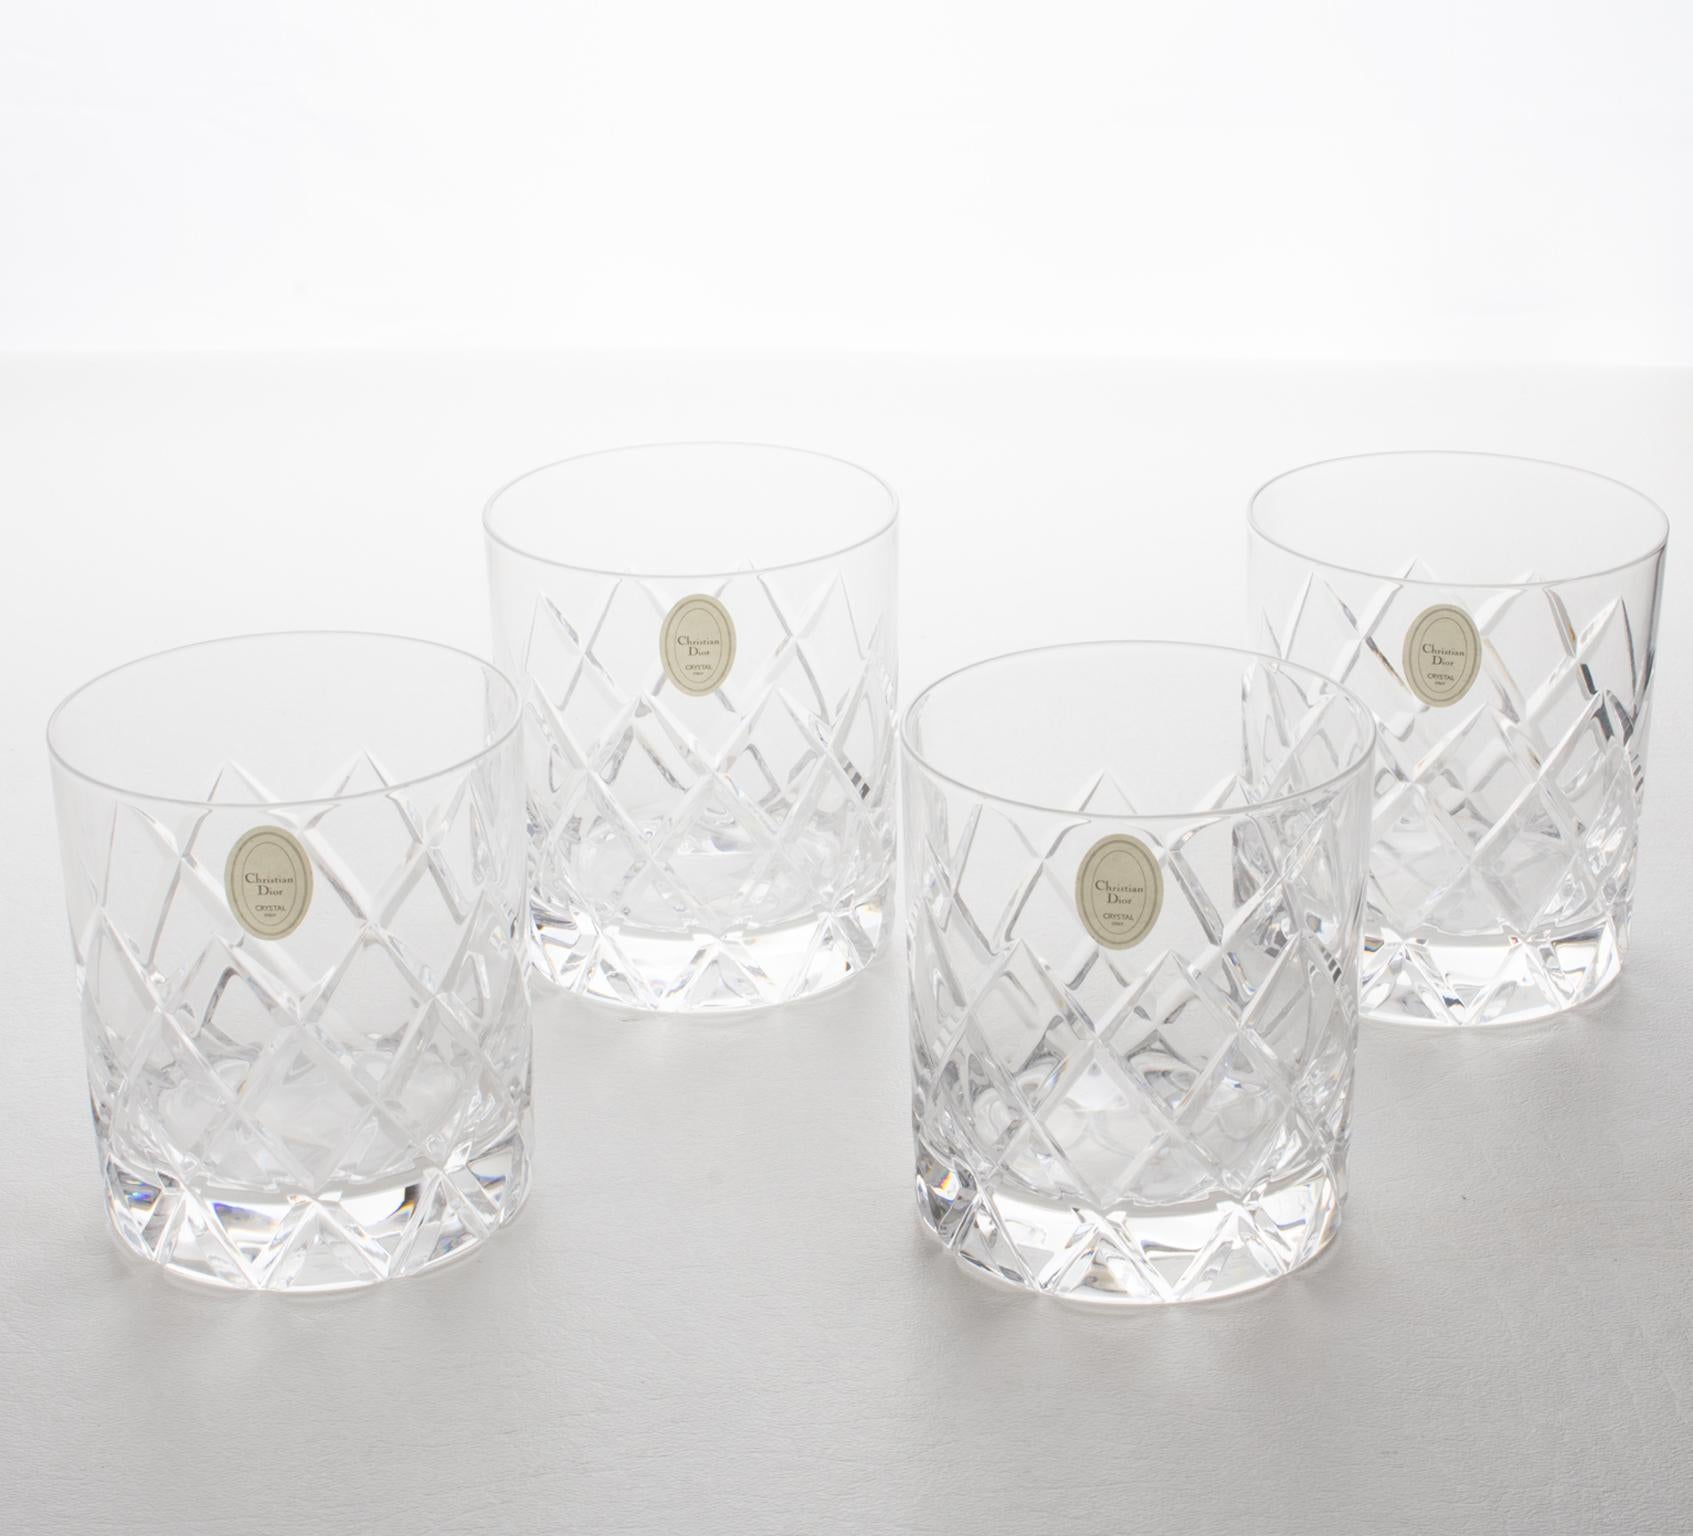 Christian Dior Crystal Decanter and Glasses Set, 5 pieces in Original Box, 1980s 8